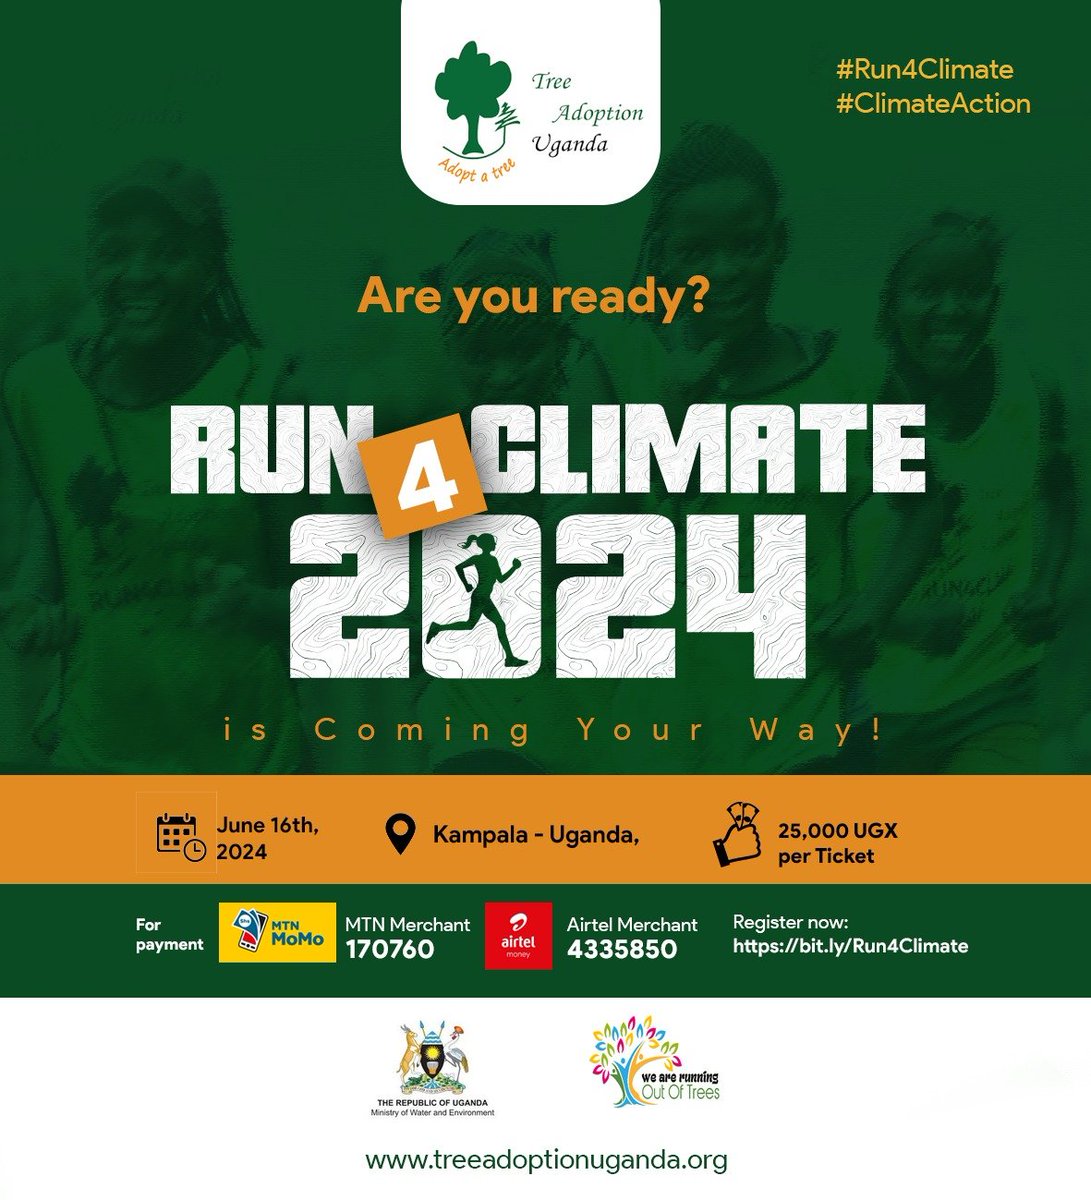 #Run4Climate Run the race for our planet with the running kit at only 25,000 UGX because together, we can create a world worth running for! 🌳🏃🏃‍♂️ Join me on 16th June,2024 as I sprint for mother earth🌎 #ClimateAction #Run4Climate